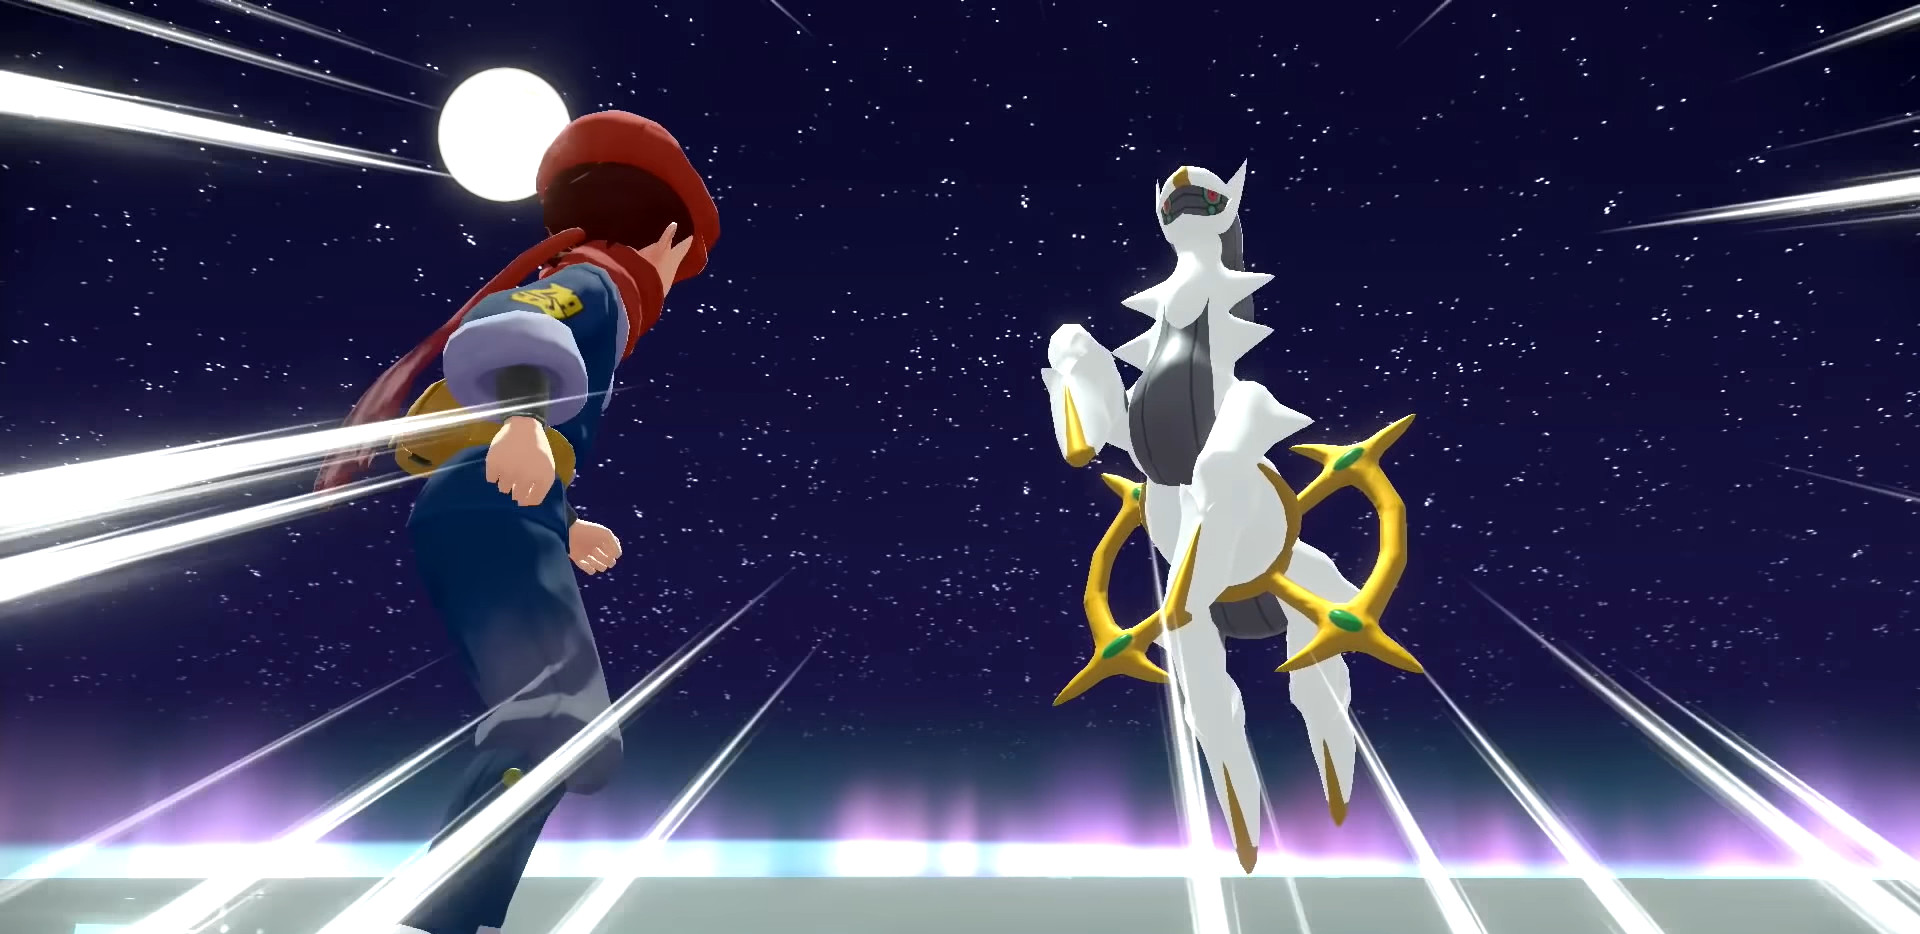 Pokemon Legends Arceus proves why there needs to be a Pokemon